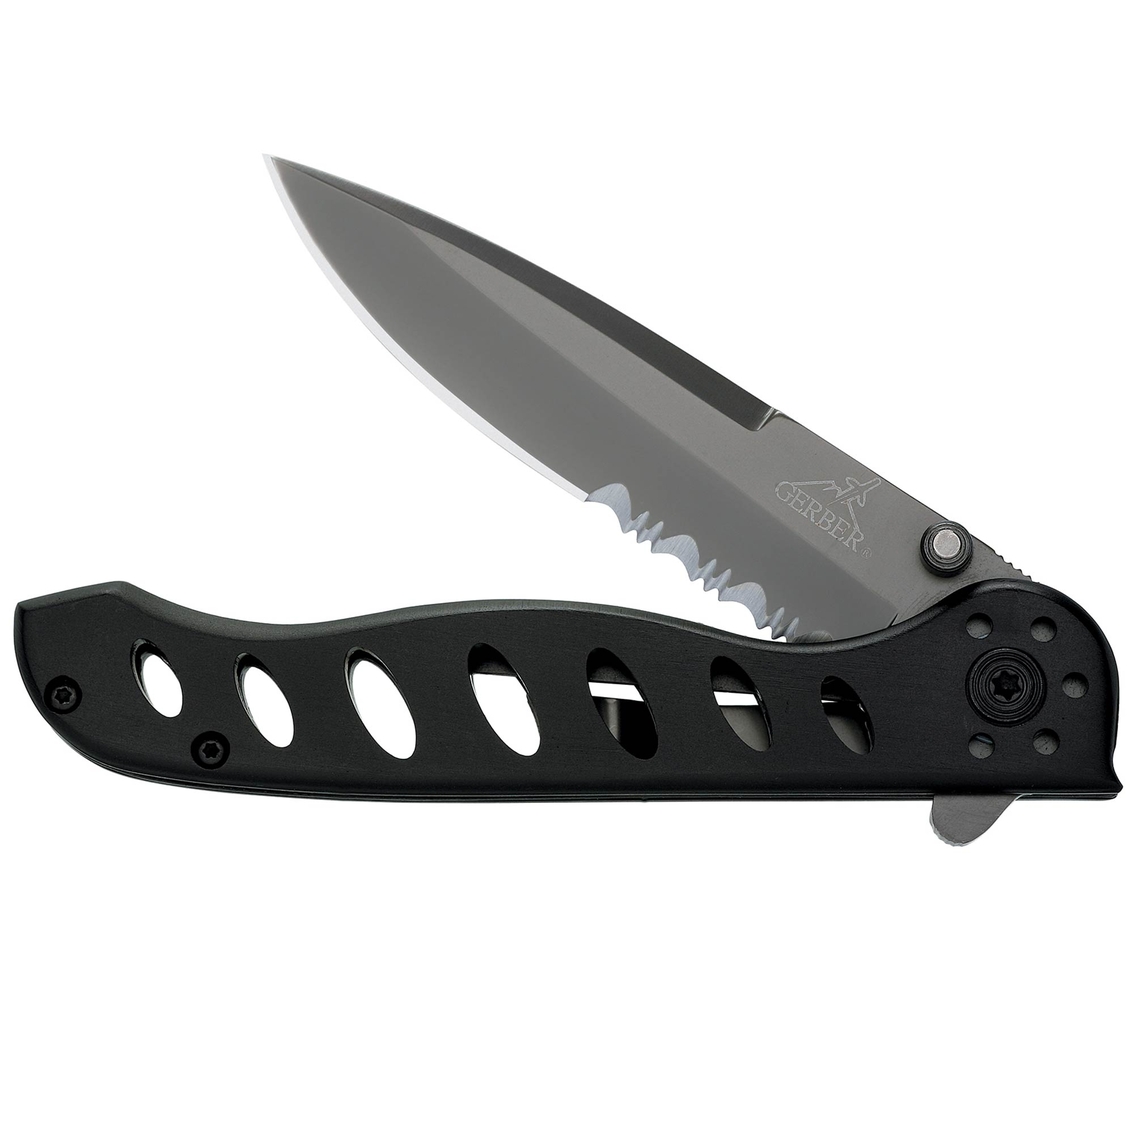 Gerber Knives and Tools Evo 3.0 Blade - Image 1 of 2